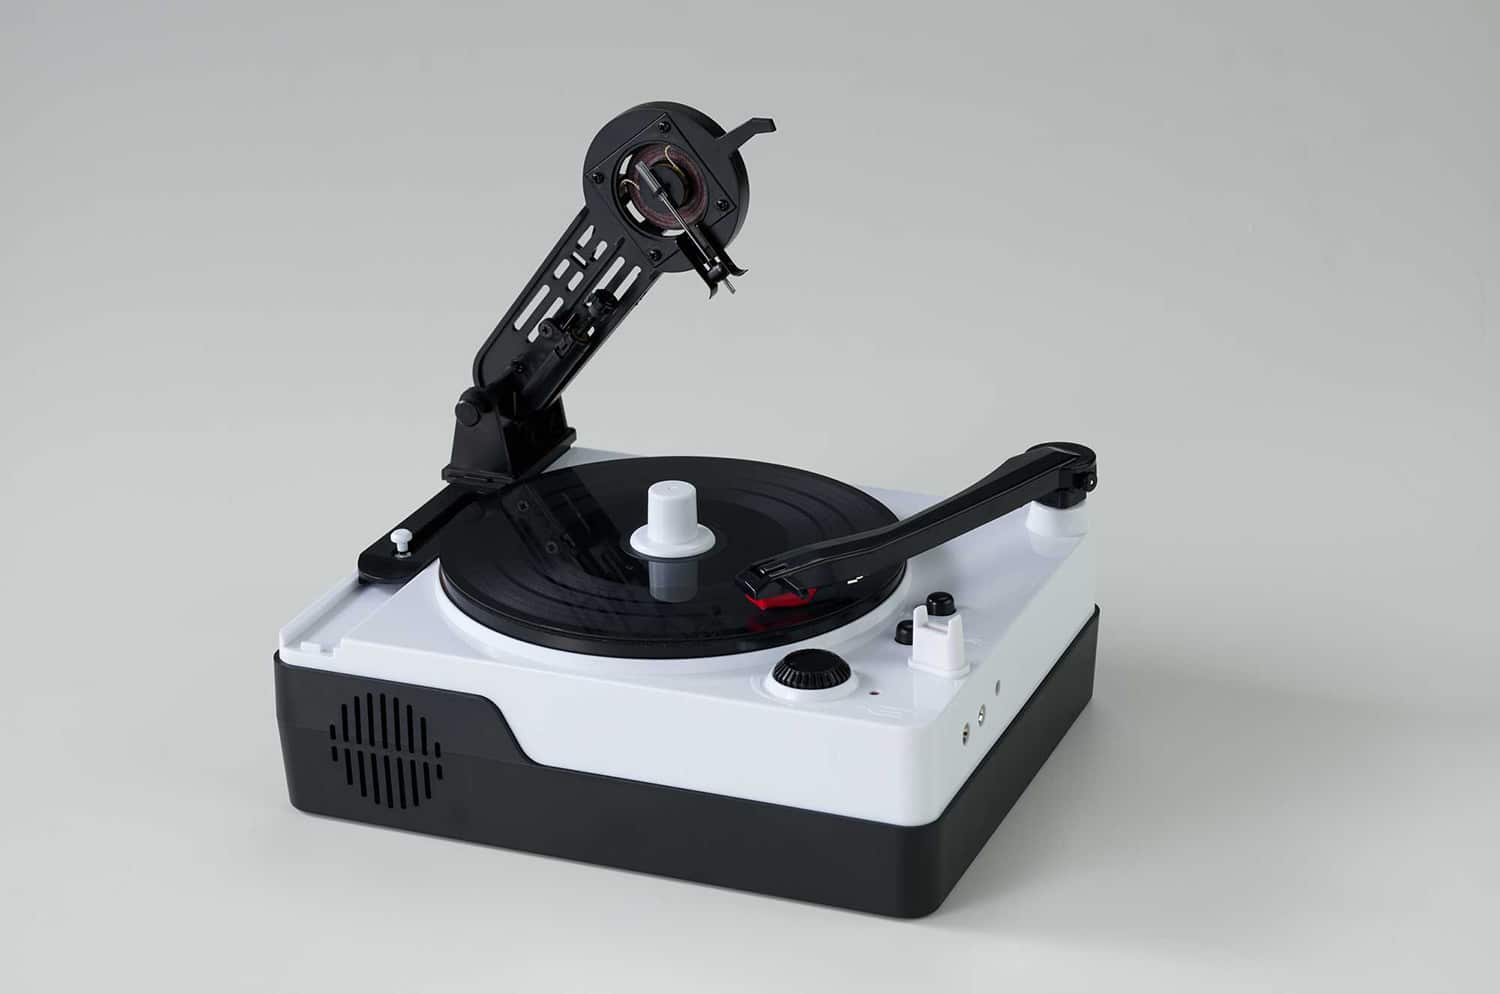 The Instant Record Cutting Machine able to cut blank vinyl discs and play them back instantly.